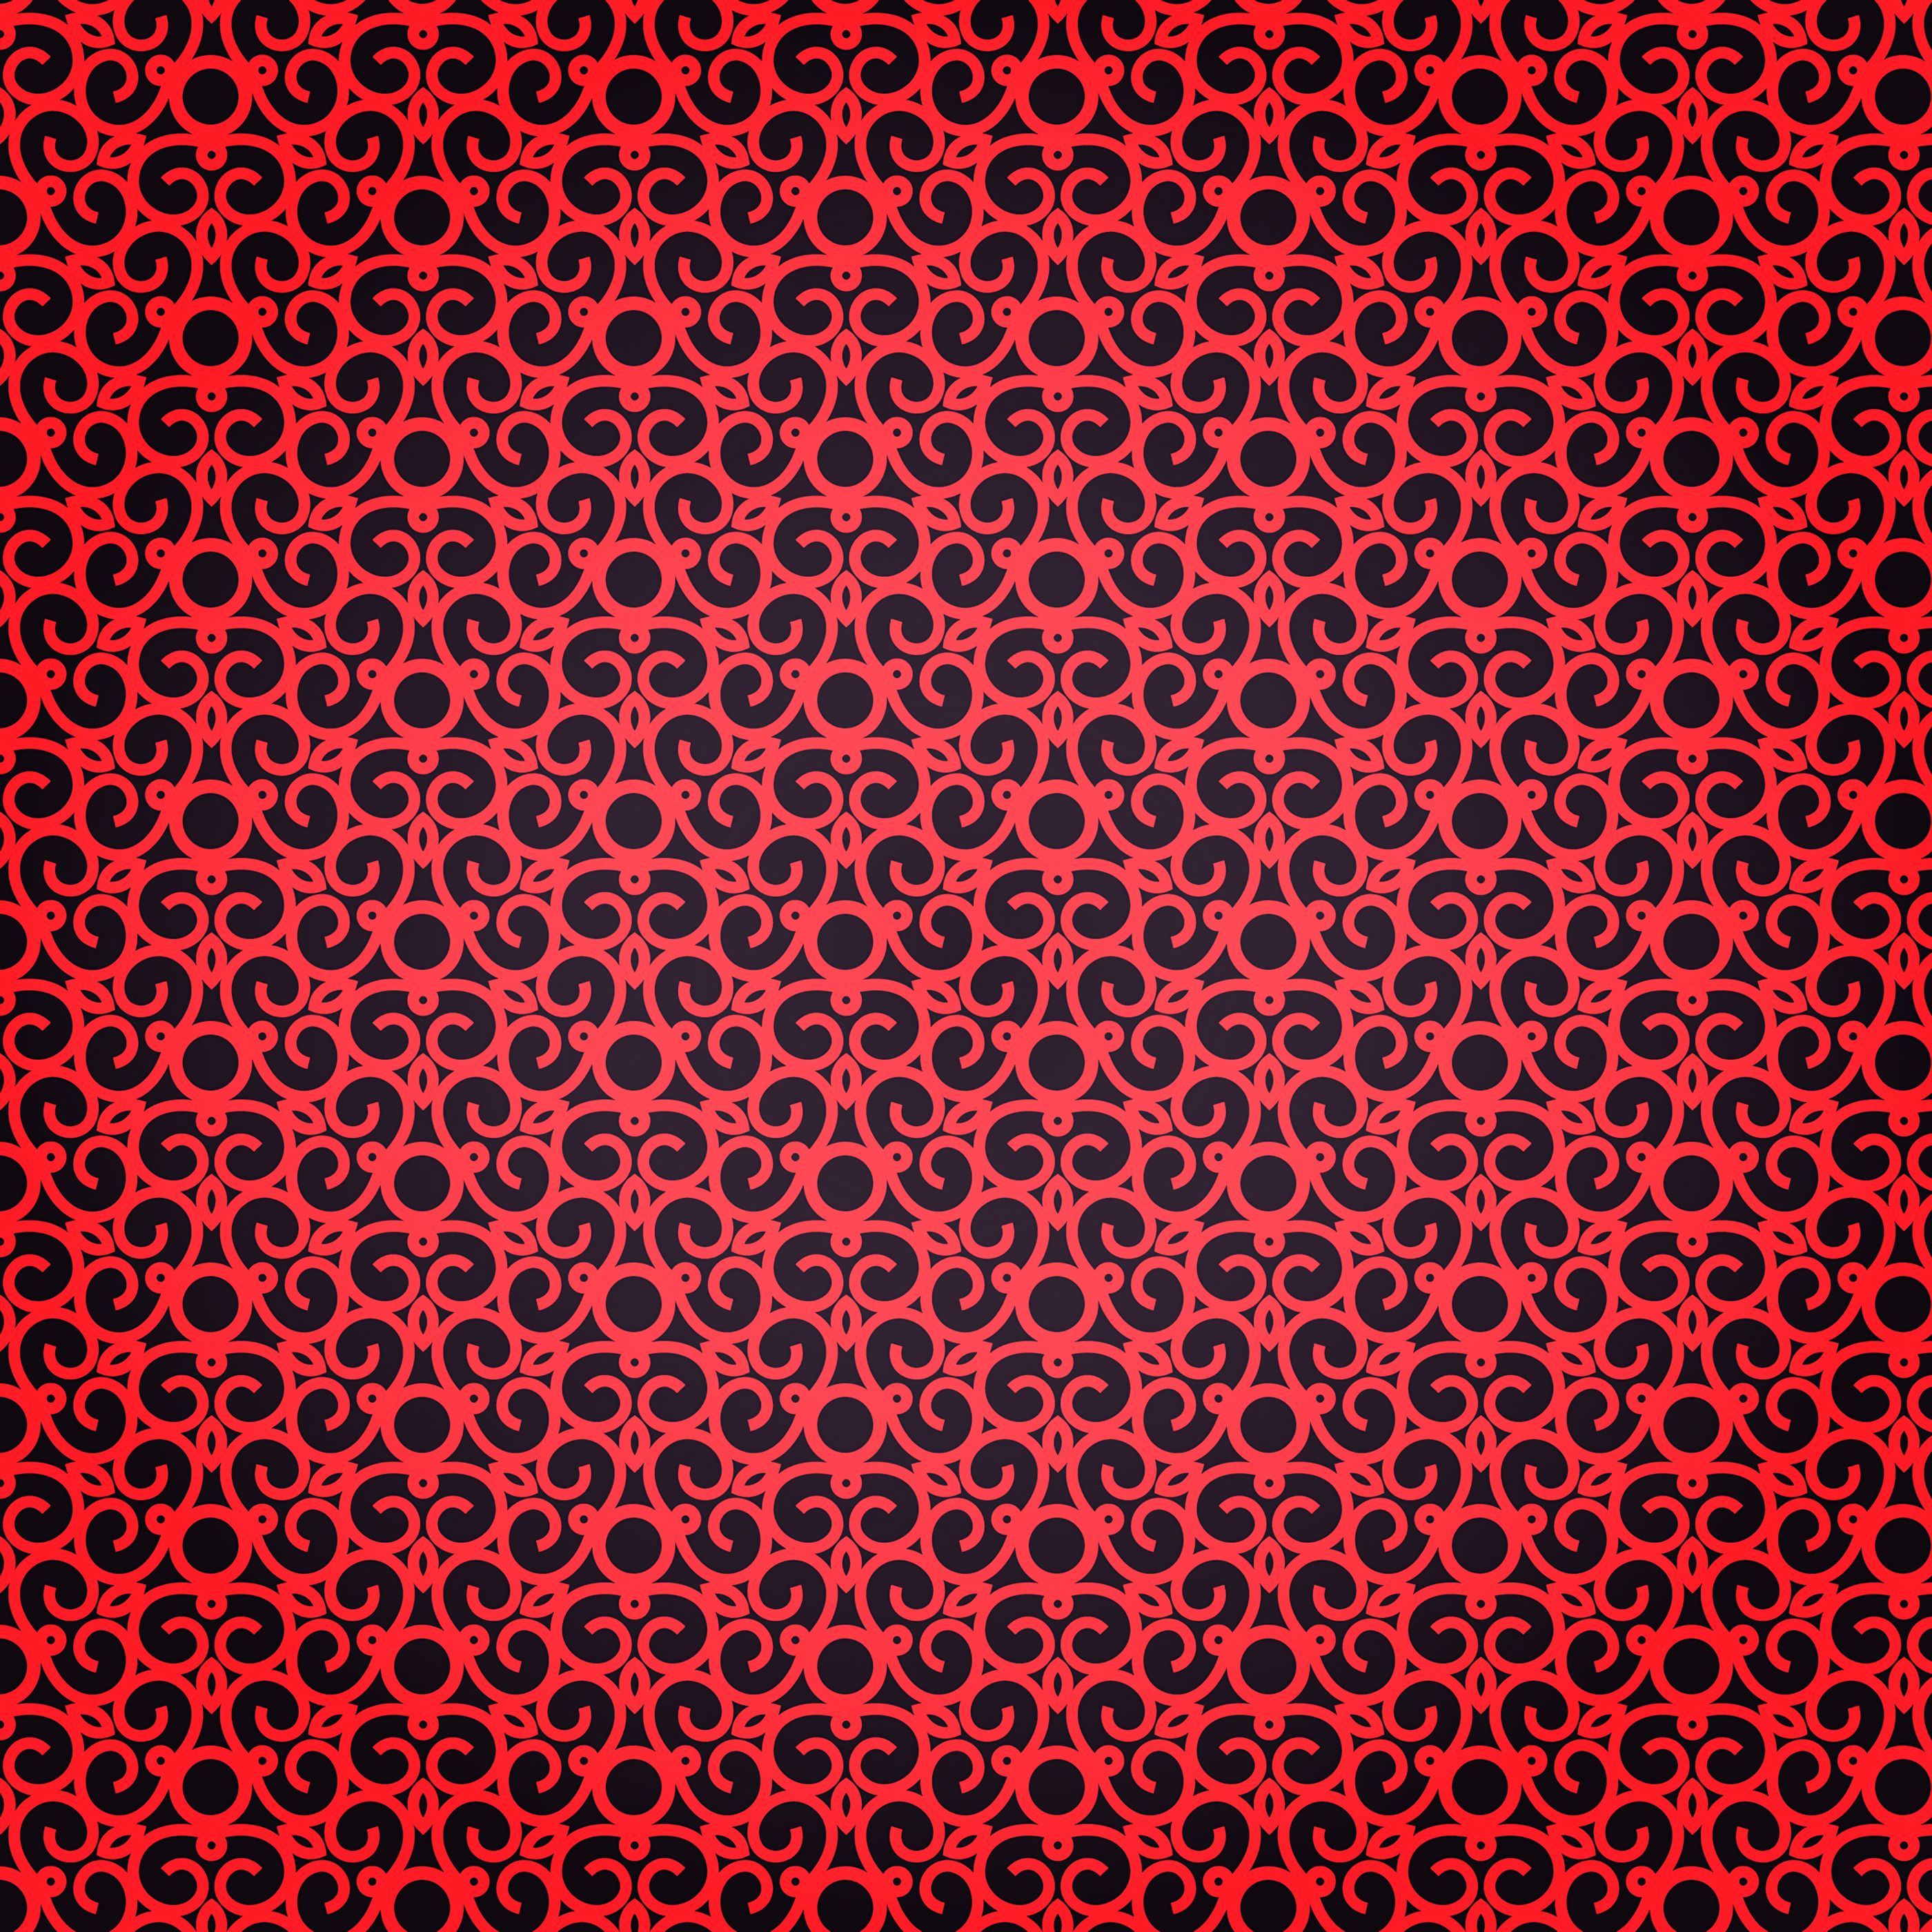 texture, patterns, black, red, textures, swirling, involute mobile wallpaper